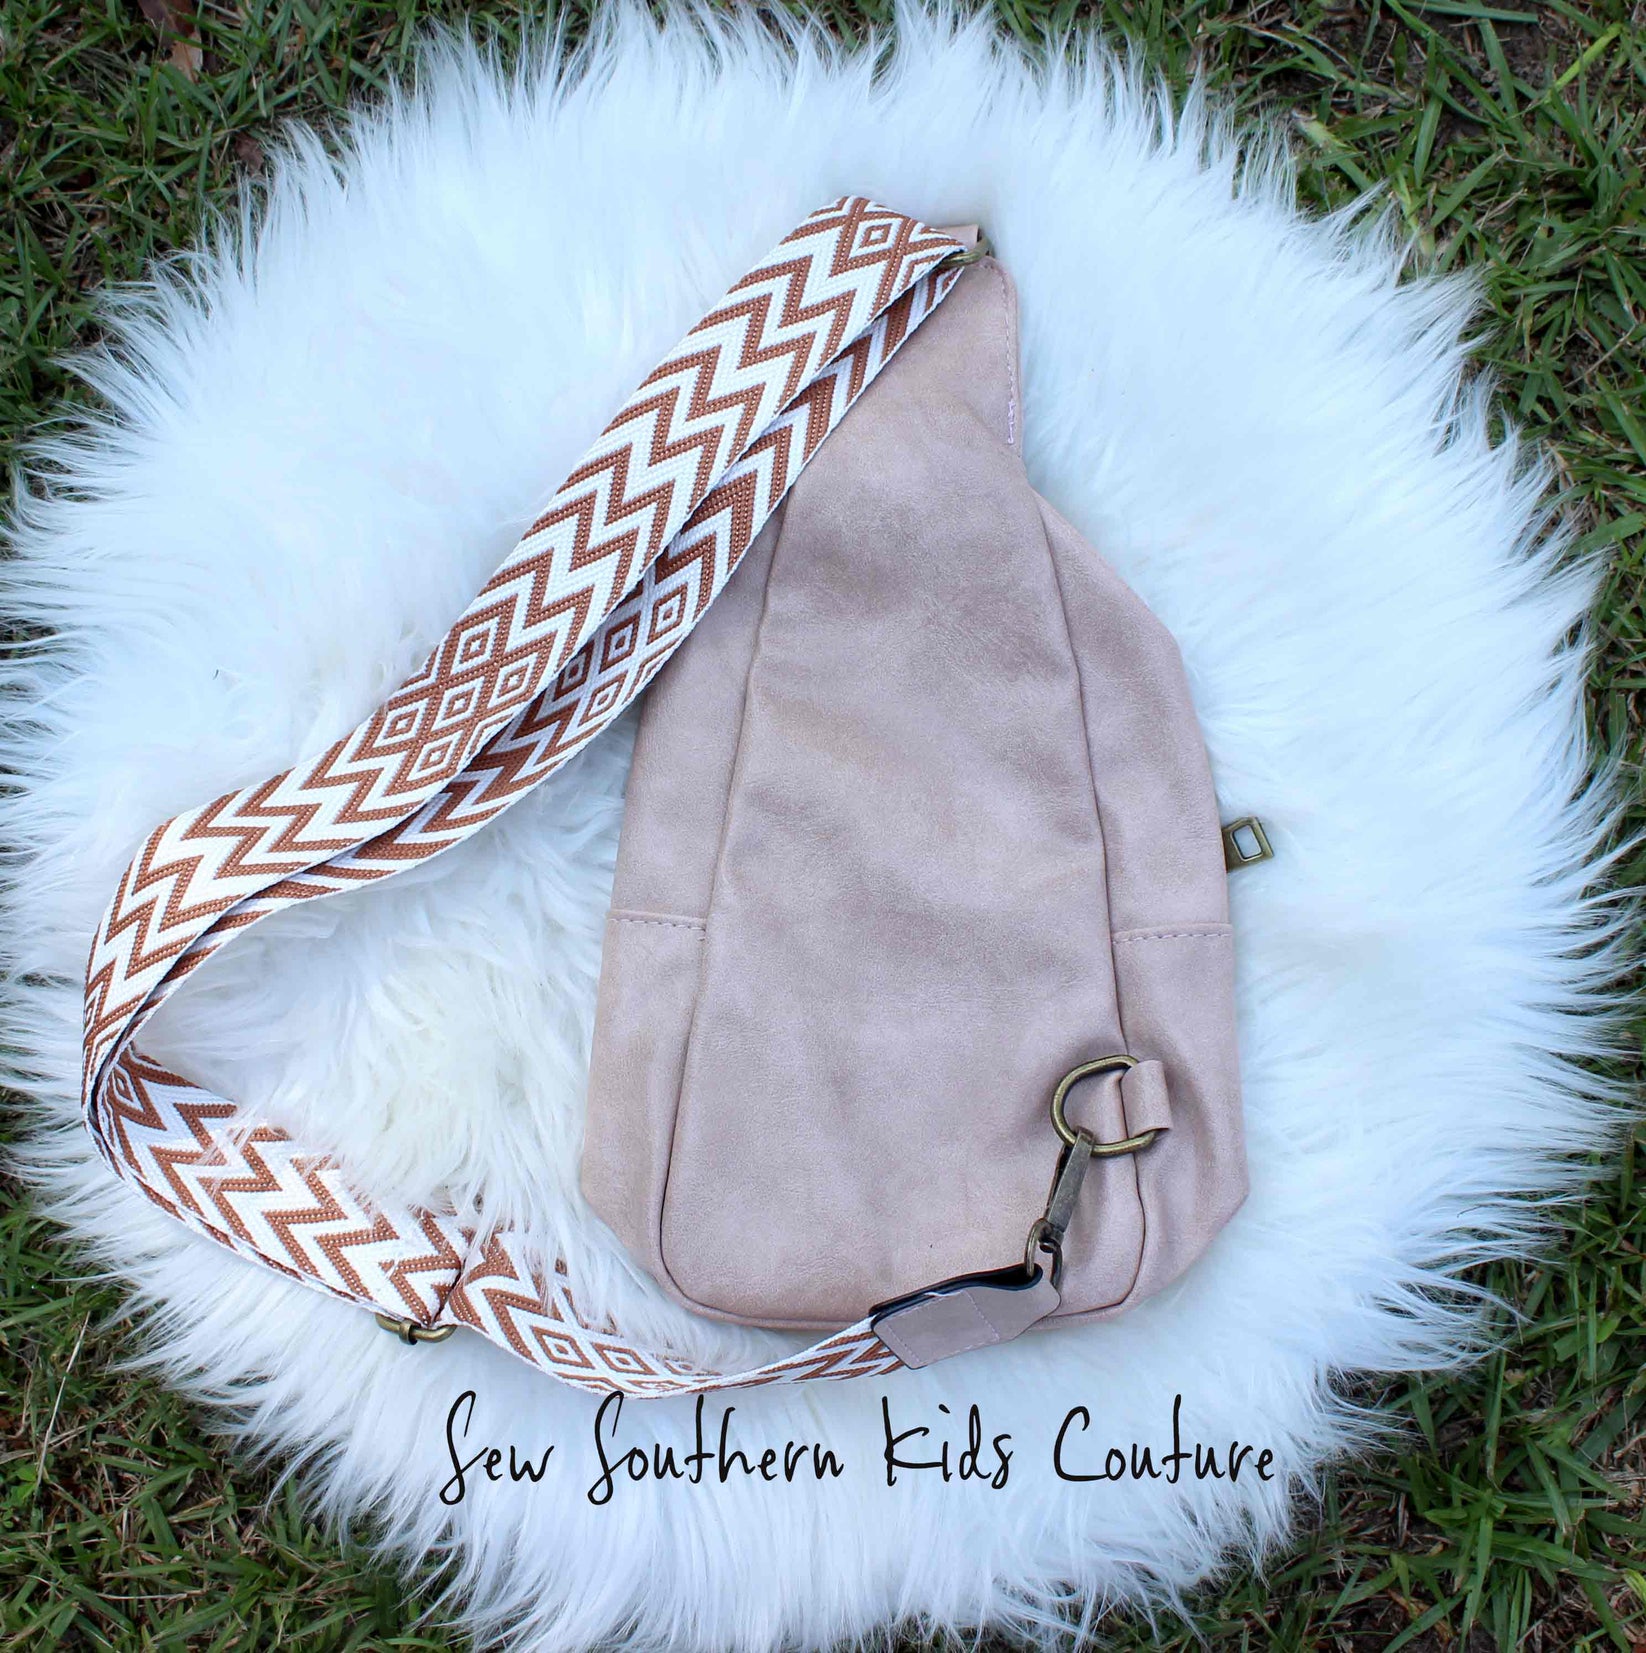 Light Pink Soft Vegan Leather Crossbody Bag – Sew Southern Kids Couture